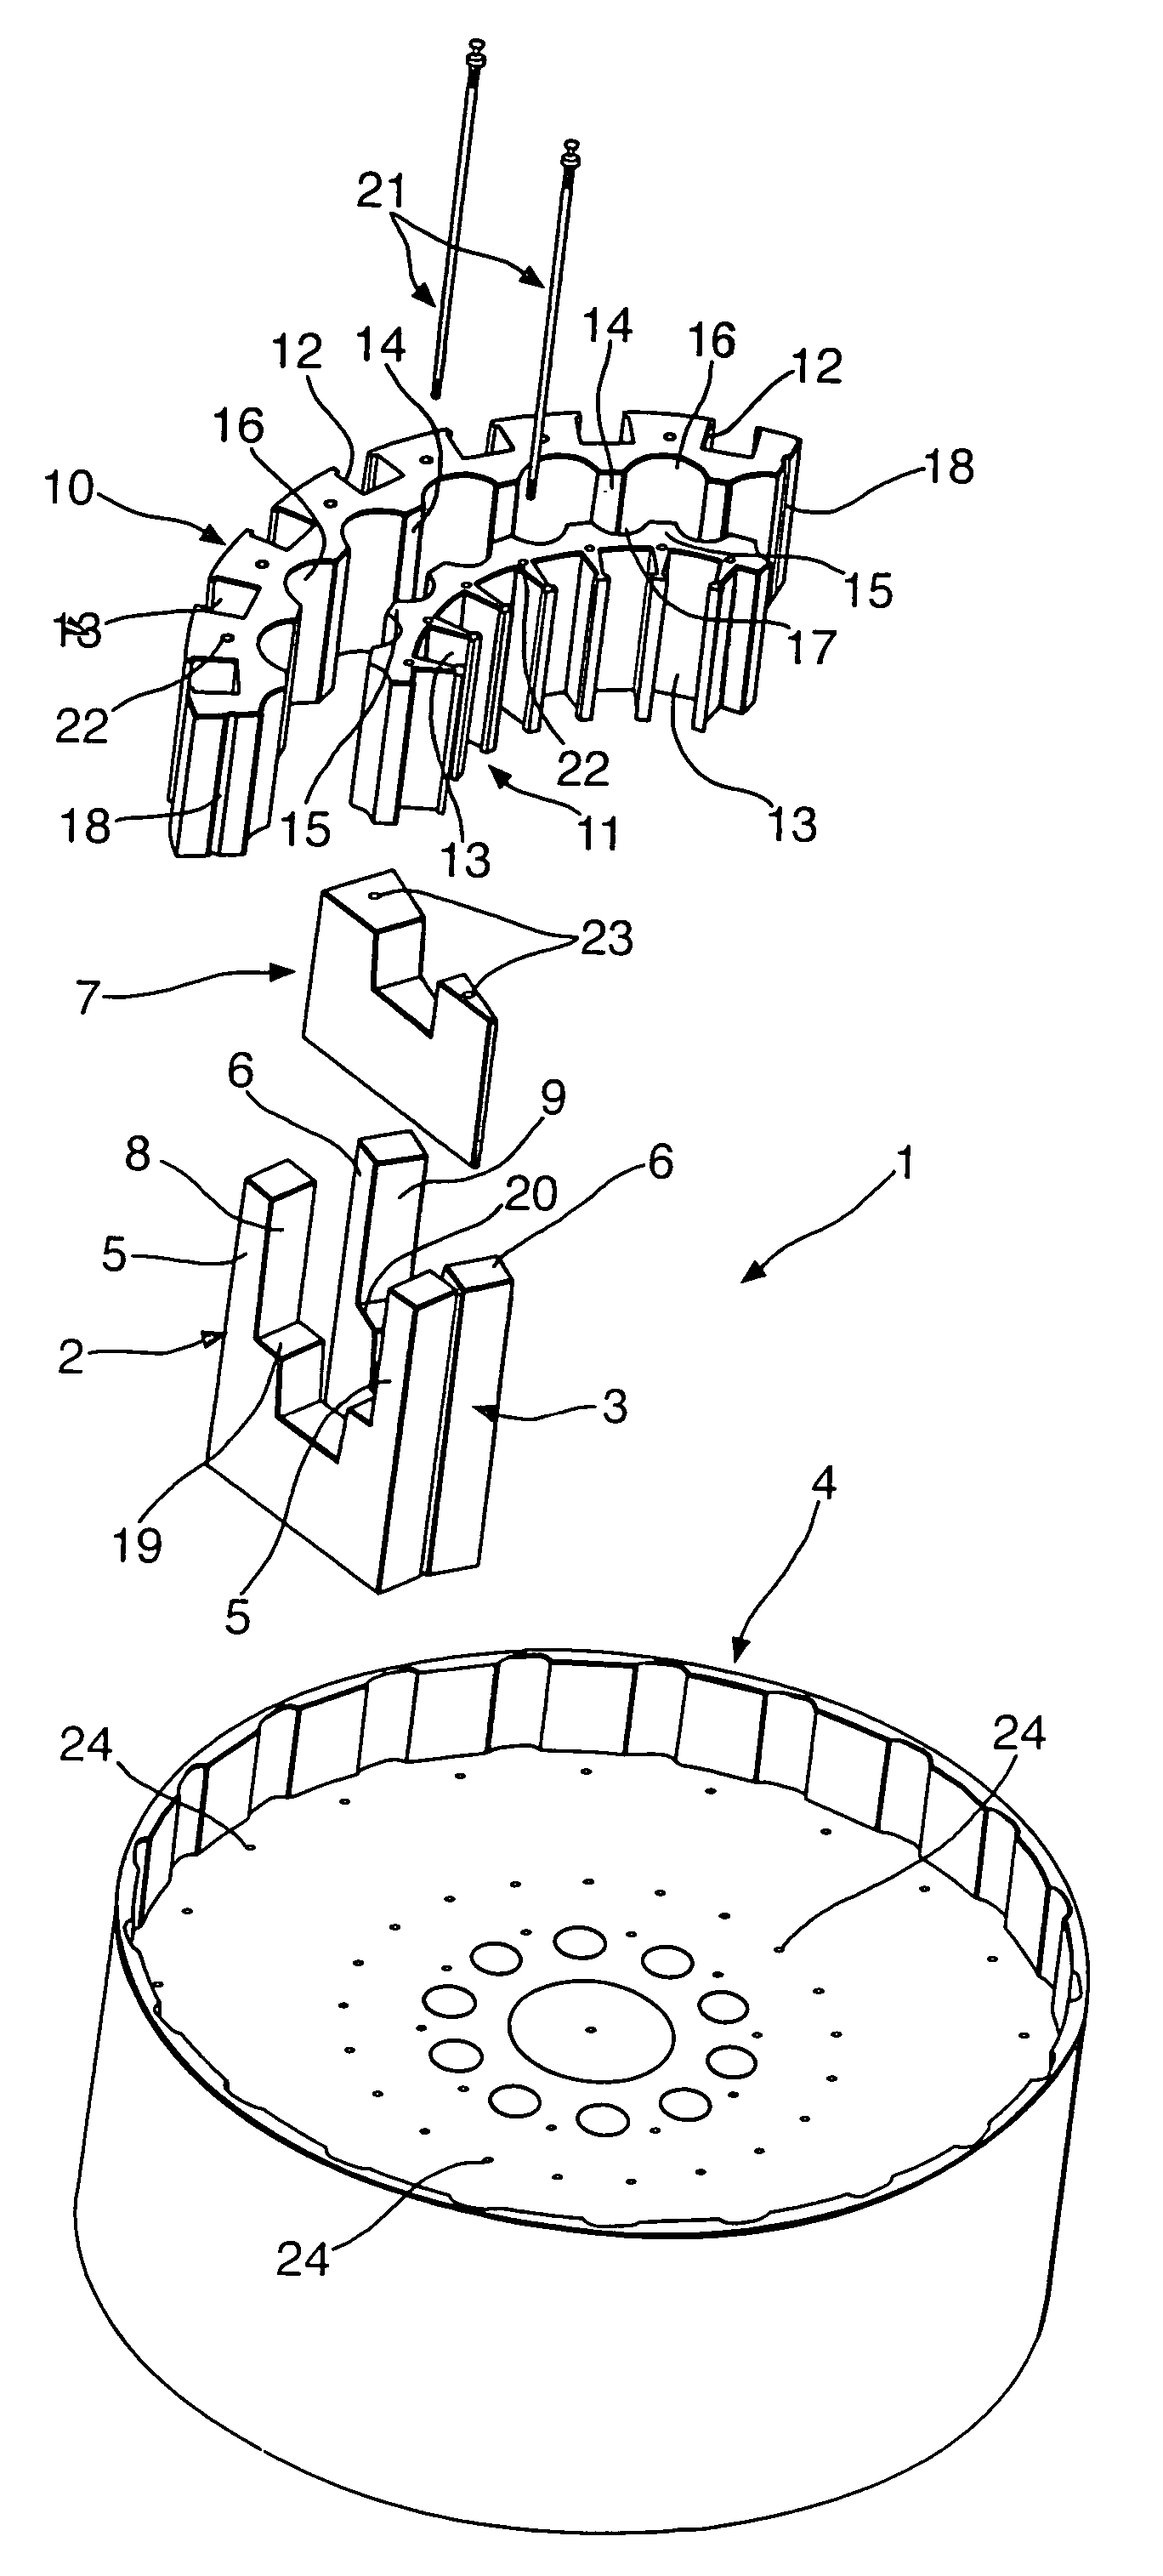 Stator pole structure for an electrical machine